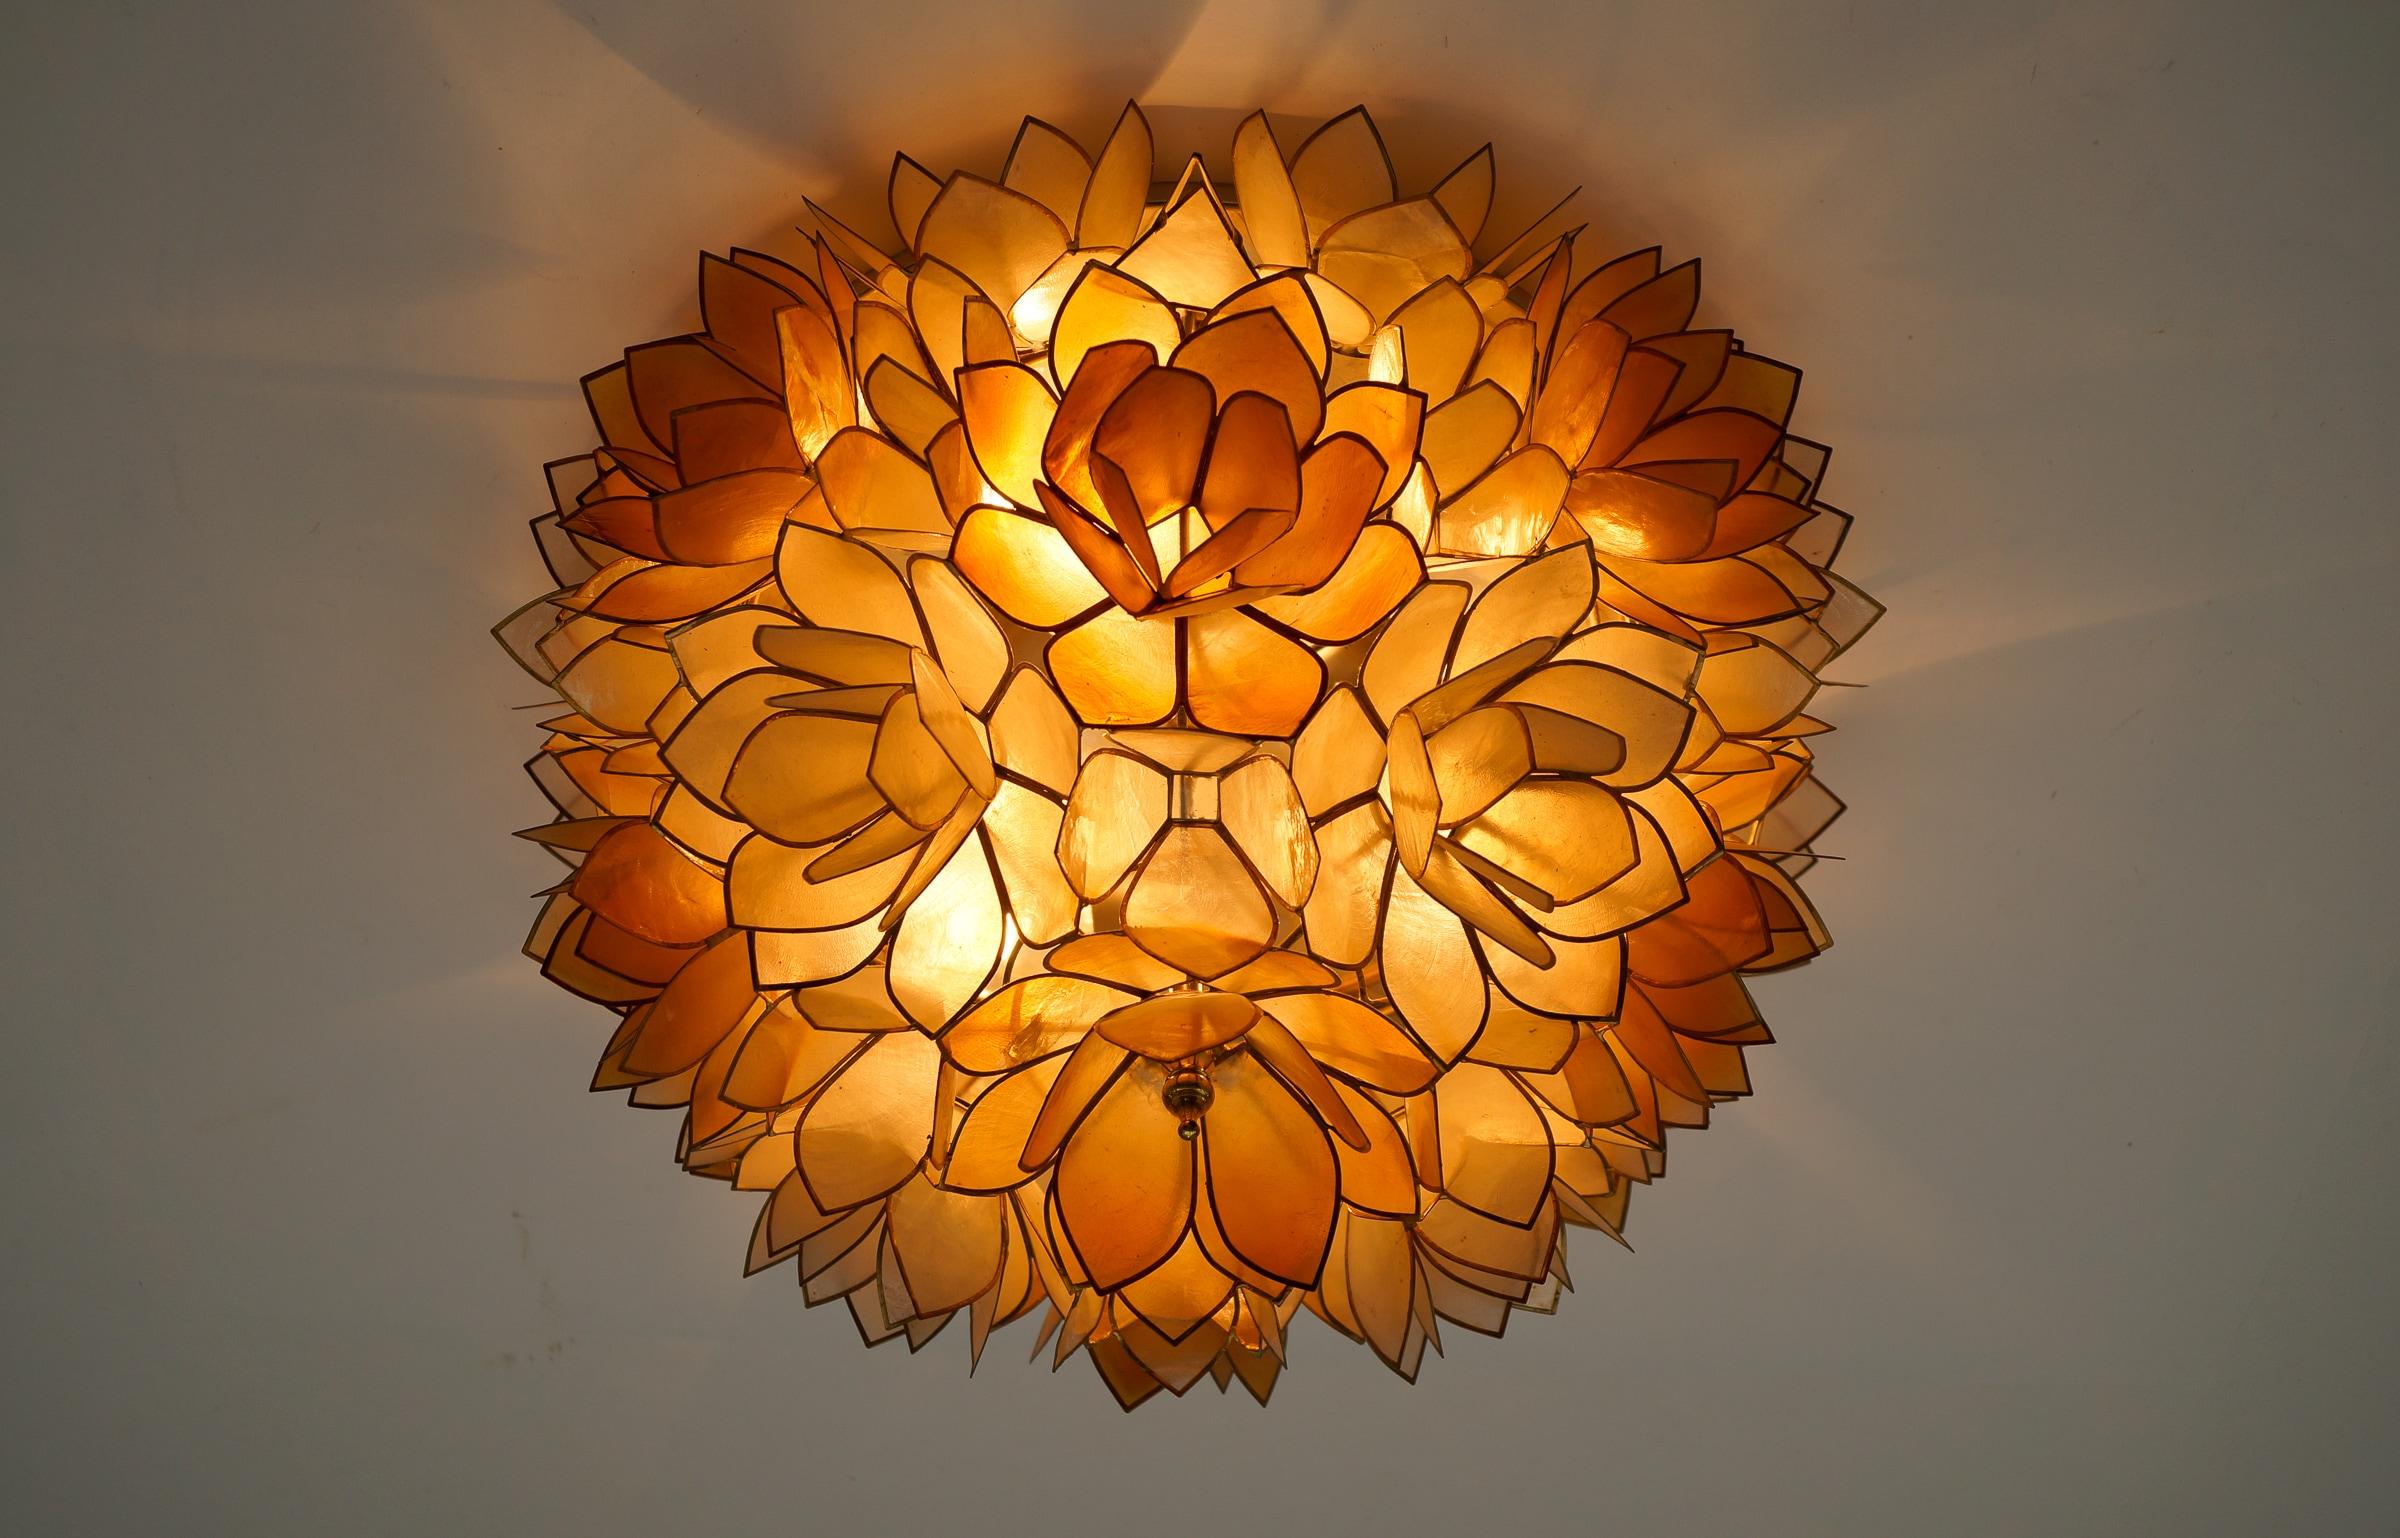 Flower Spherical Wall or Ceiling Lamps Made of Mother-of-Pearl in Orange, 1960s For Sale 1